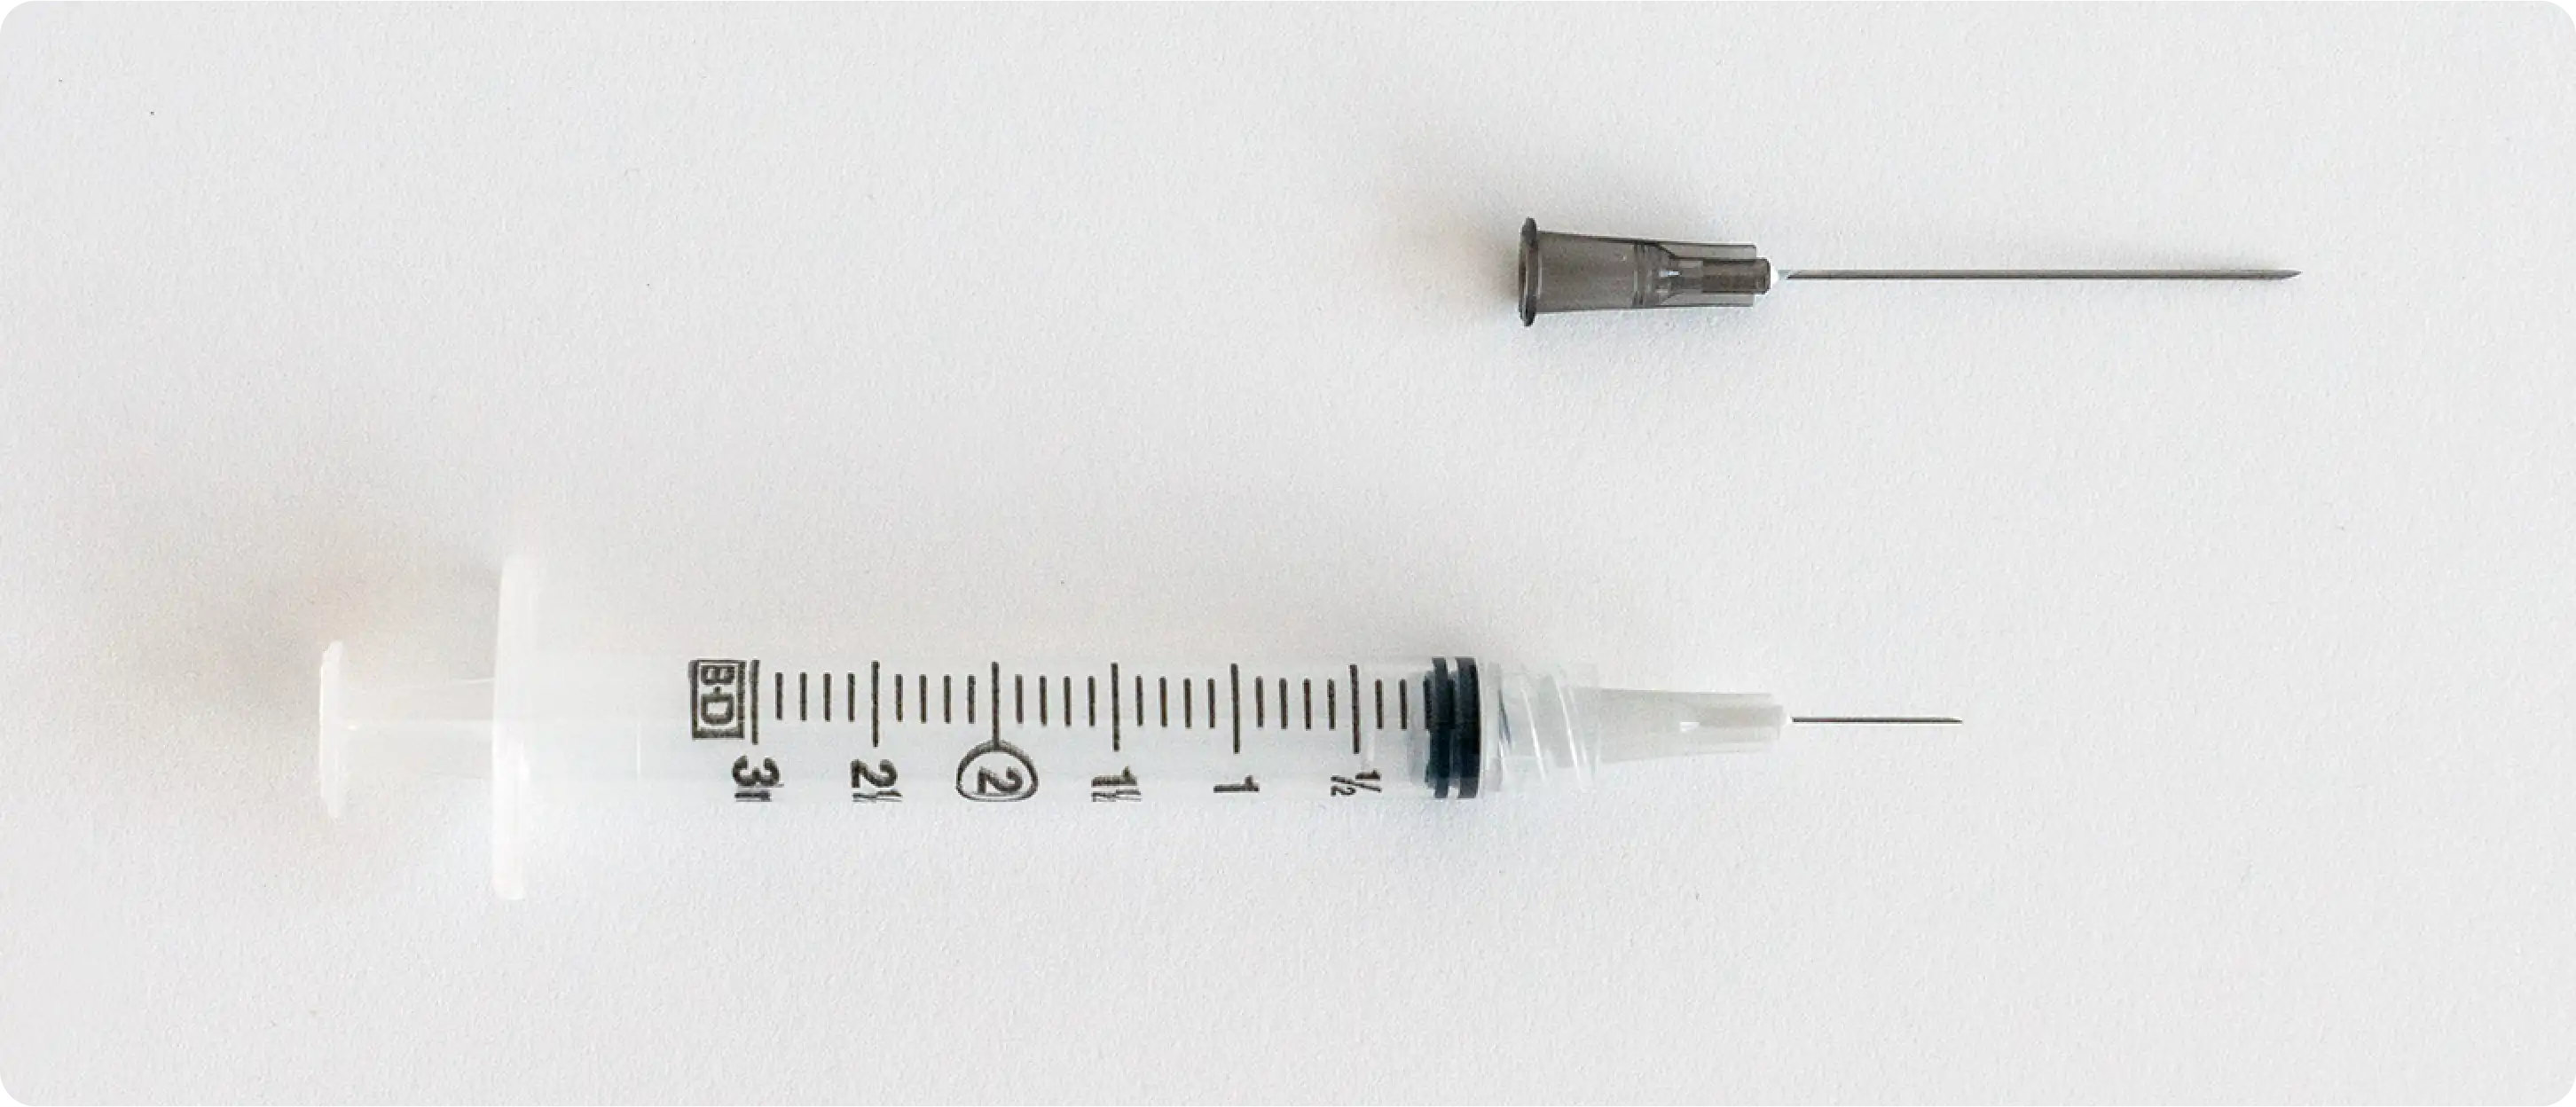 A mixing needle and injection needle.